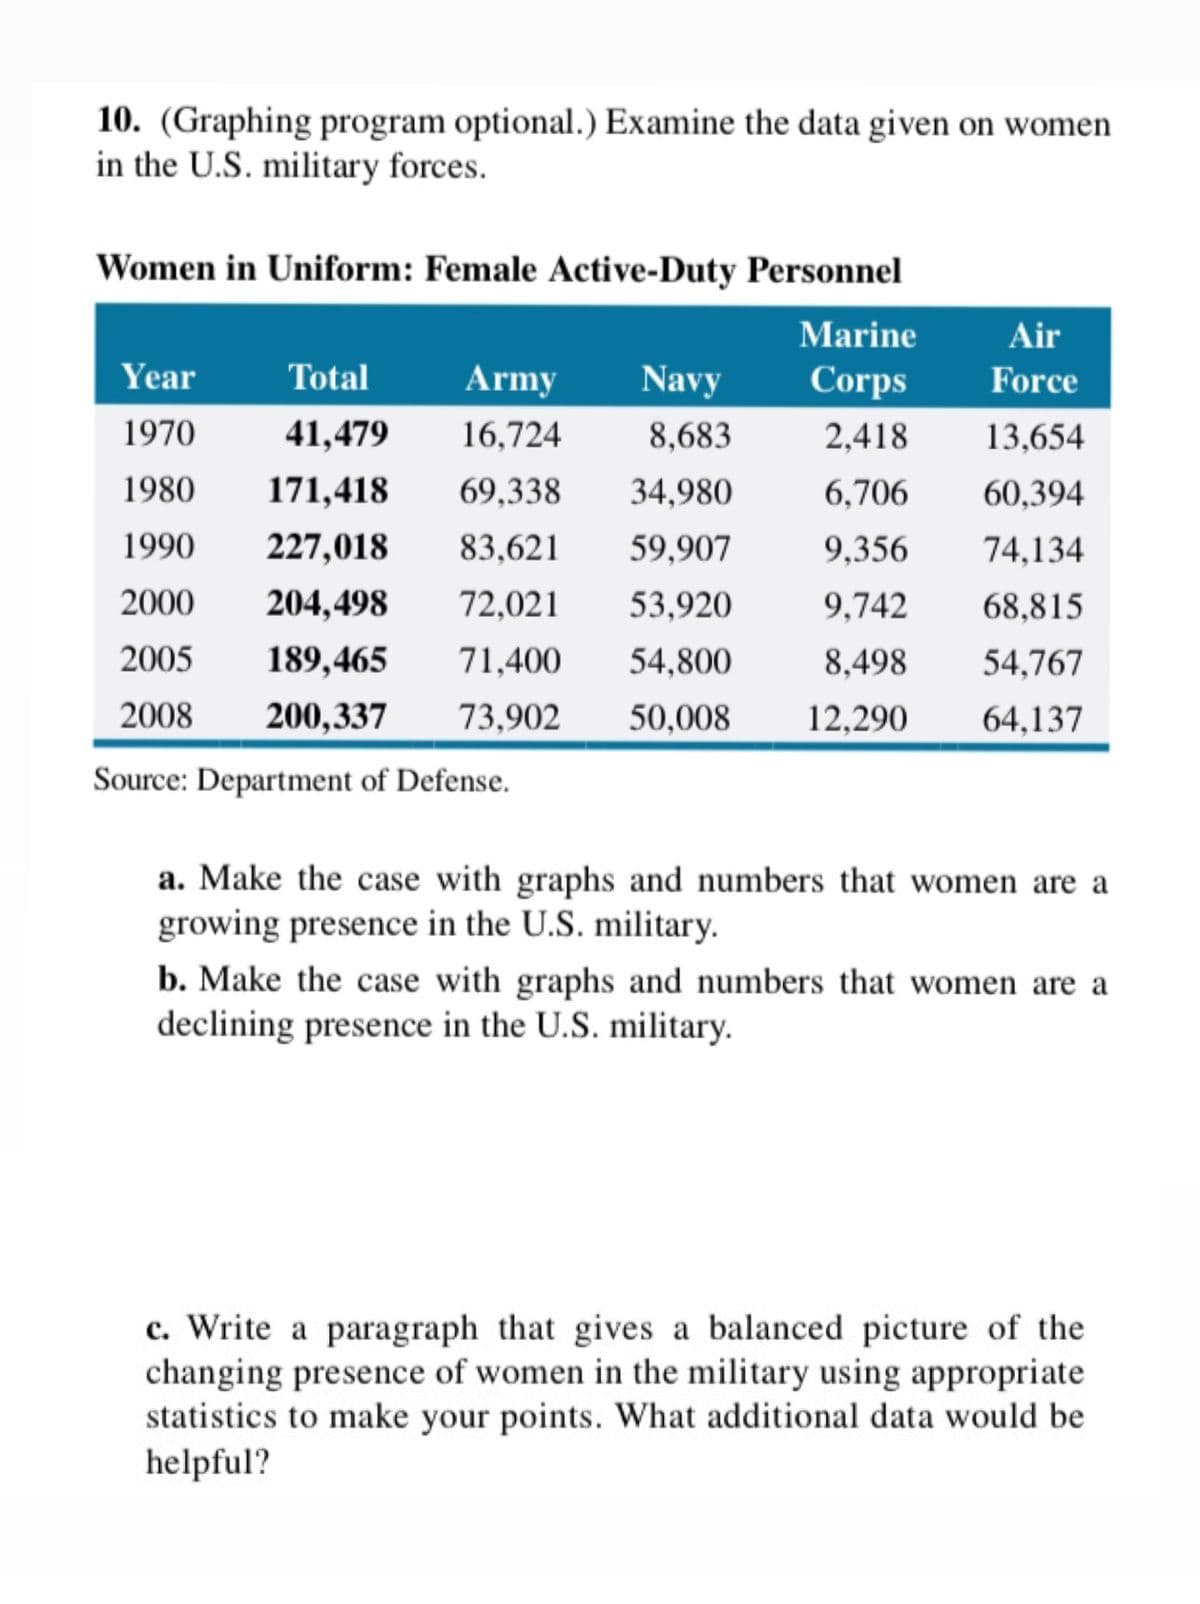 10. (Graphing program optional.) Examine the data given on women
in the U.S. military forces.
Women in Uniform: Female Active-Duty Personnel
Marine
Air
Year
Total
Army
Navy
Corps
Force
1970
41,479
16,724
8.683
2.418
13,654
1980
171,418
69,338
34,980
6,706
60,394
1990
227,018
83,621
59,907
9,356
74,134
2000
204,498
72,021
53,920
9,742
68,815
2005
189,465
71,400
54,800
8,498
54.767
2008
200,337
73,902
50,008
12,290
64,137
Source: Department of Defense.
a. Make the case with graphs and numbers that women are a
growing presence in the U.S. military.
b. Make the case with graphs and numbers that women are a
declining presence in the U.S. military.
c. Write a paragraph that gives a balanced picture of the
changing presence of women in the military using appropriate
statistics to make your points. What additional data would be
helpful?